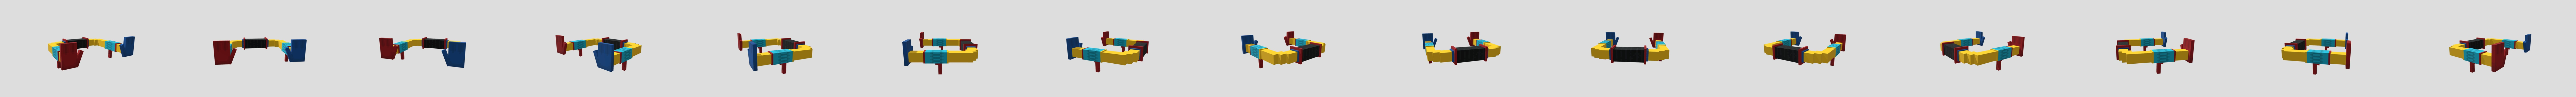 Looking to hire someone to 3d model a grab pack from Poppy Playtime.